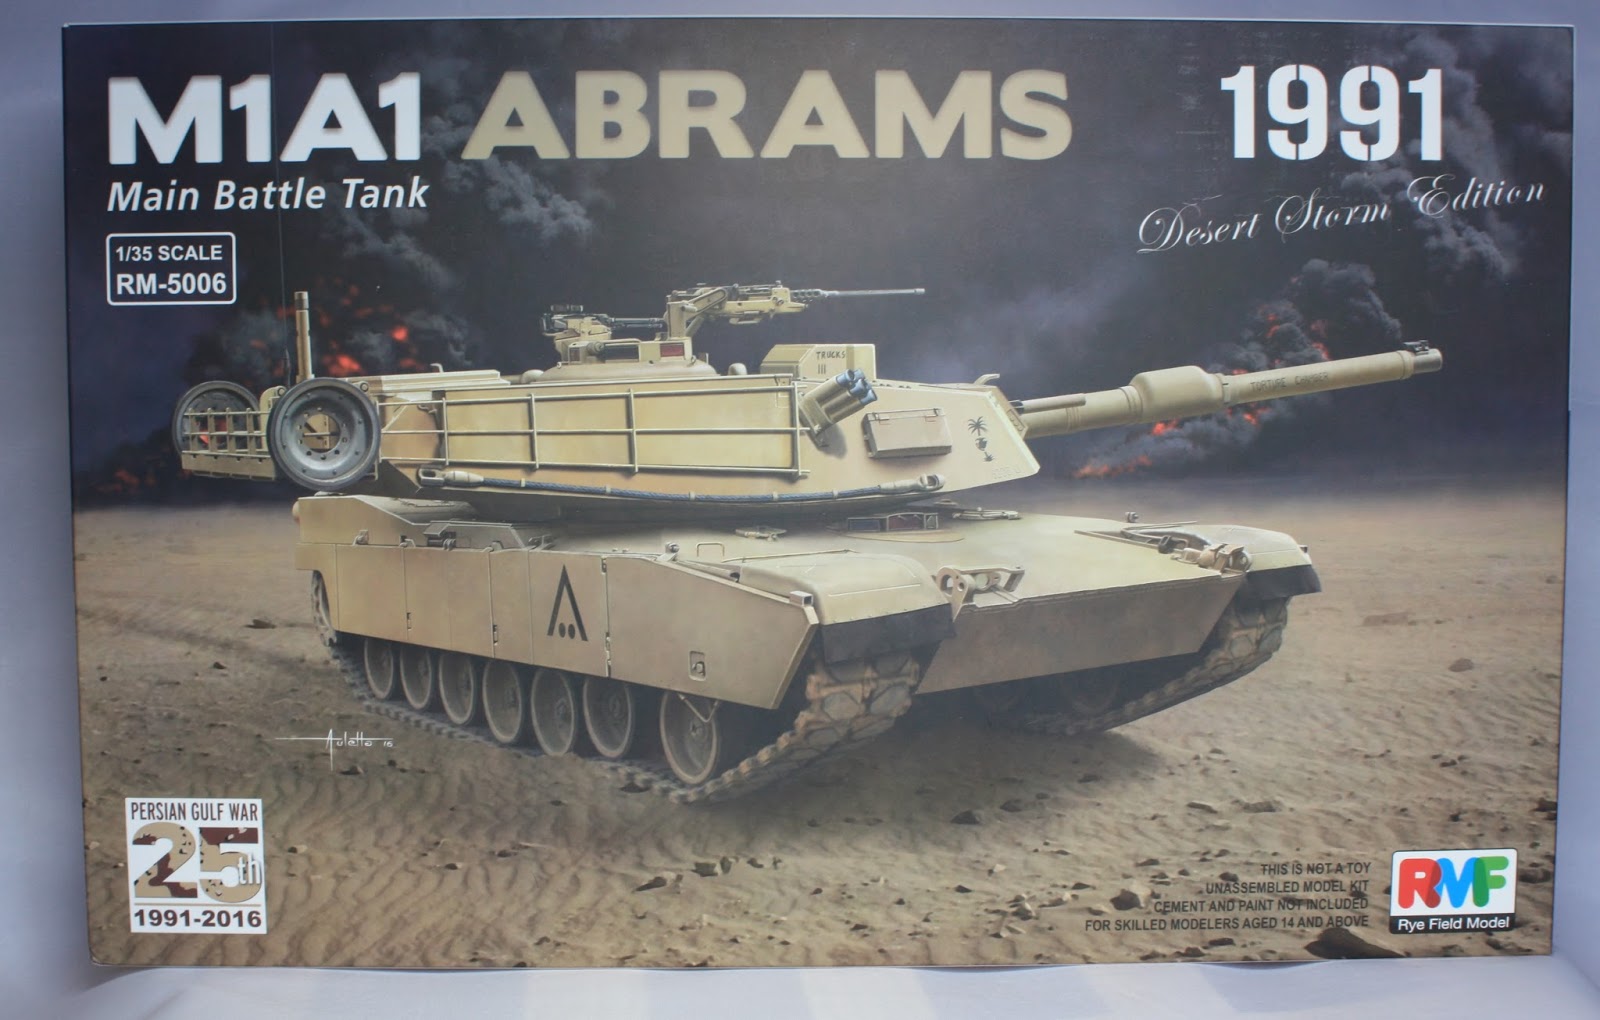 Rye Field Models M1a1 Abrams Desert Storm Edition And M1a1